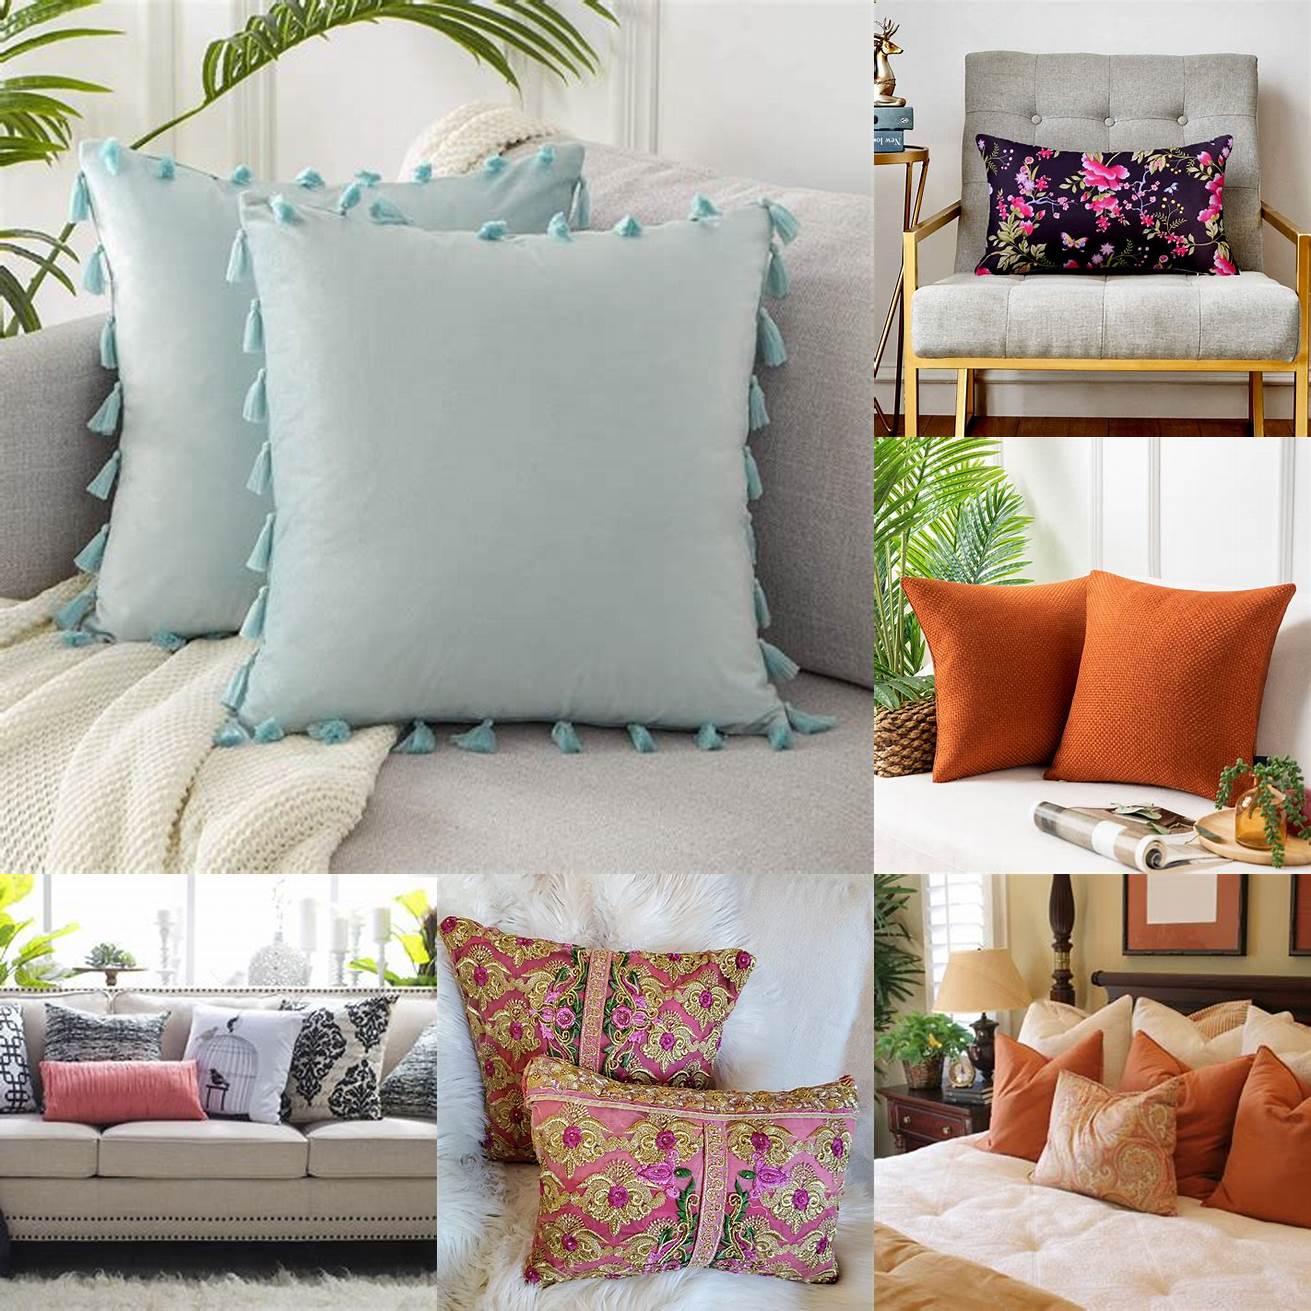 A King Size Sofa Bed accessorized with colorful throw pillows